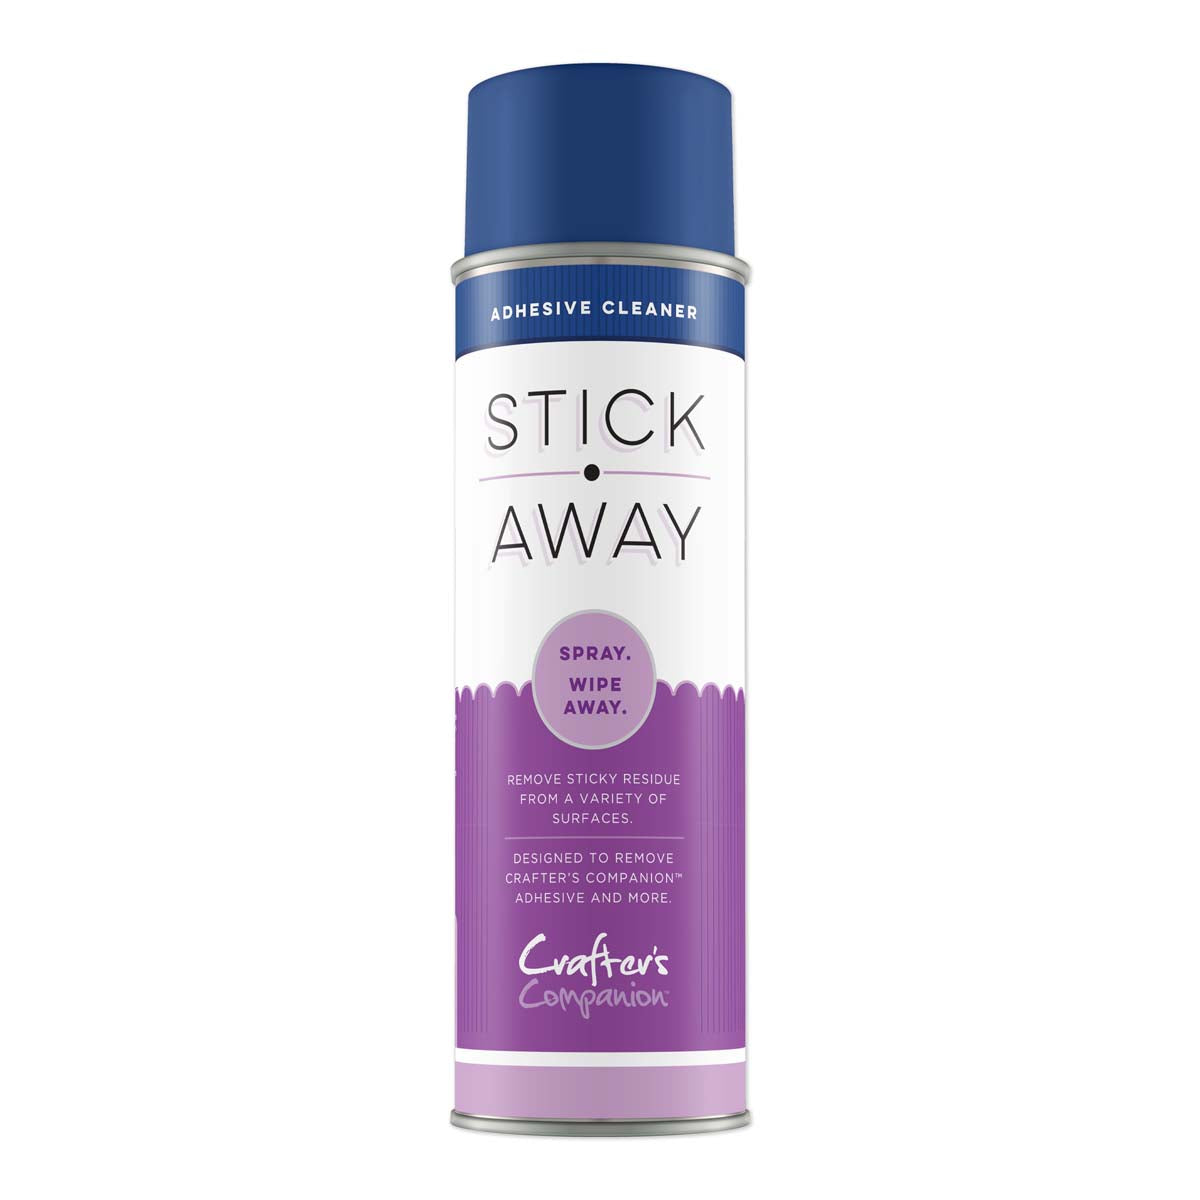 Crafter's Companion - Stick Away Adhesive Remover (BLUE CAN)